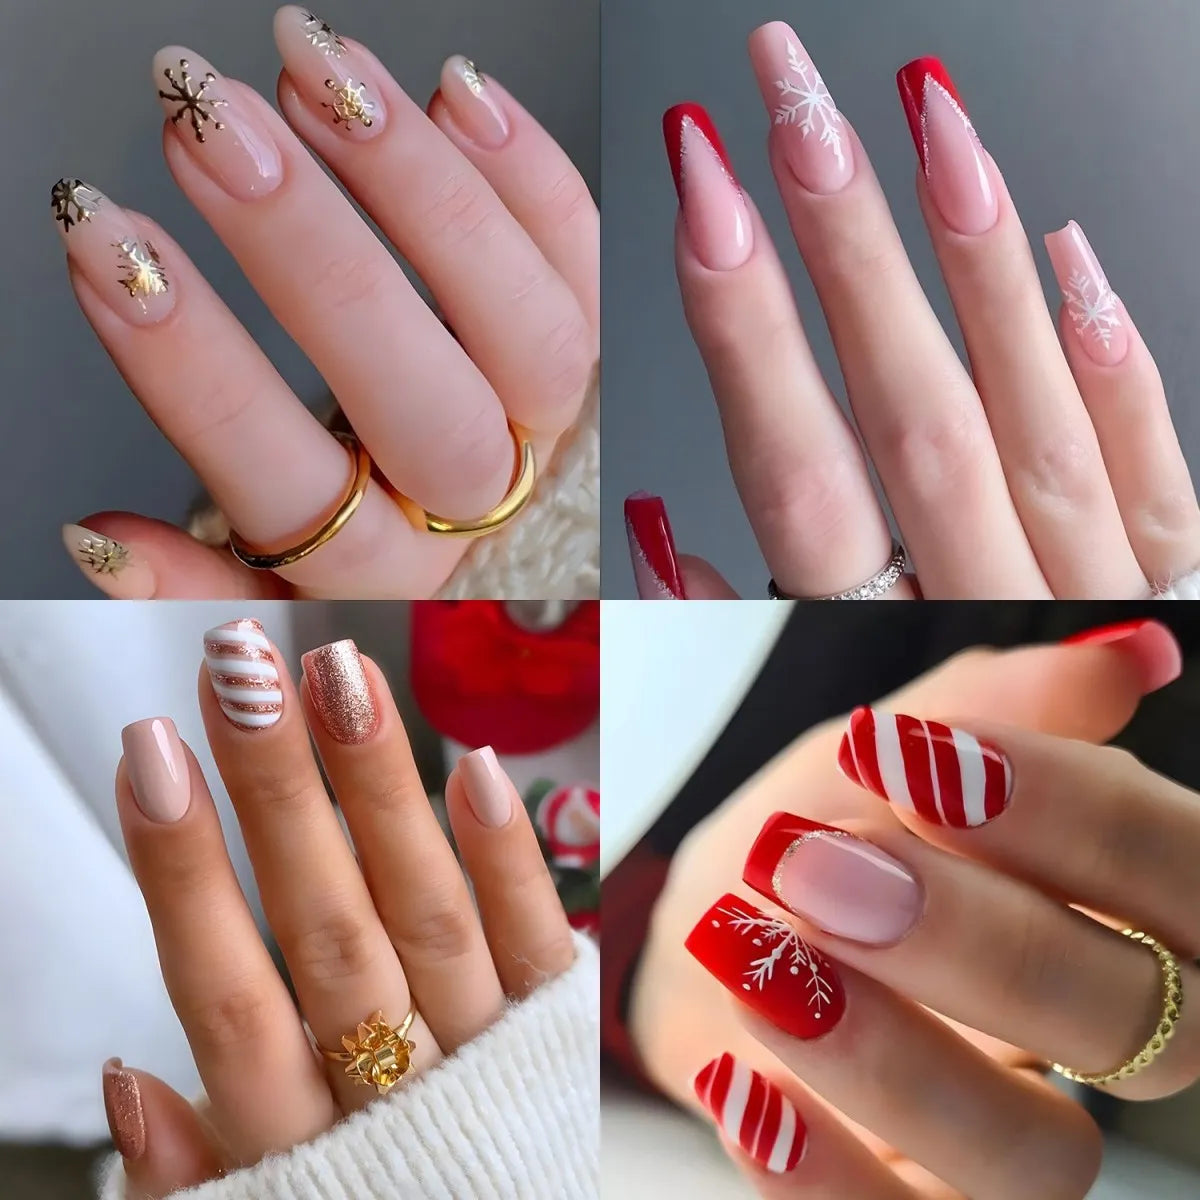 24Pcs Christmas Exclusive False Nails Wearable Xmas Style Fake Nails Checked Snowflake Design Full Cover Press on Manicure Tips* Basso & Brooke